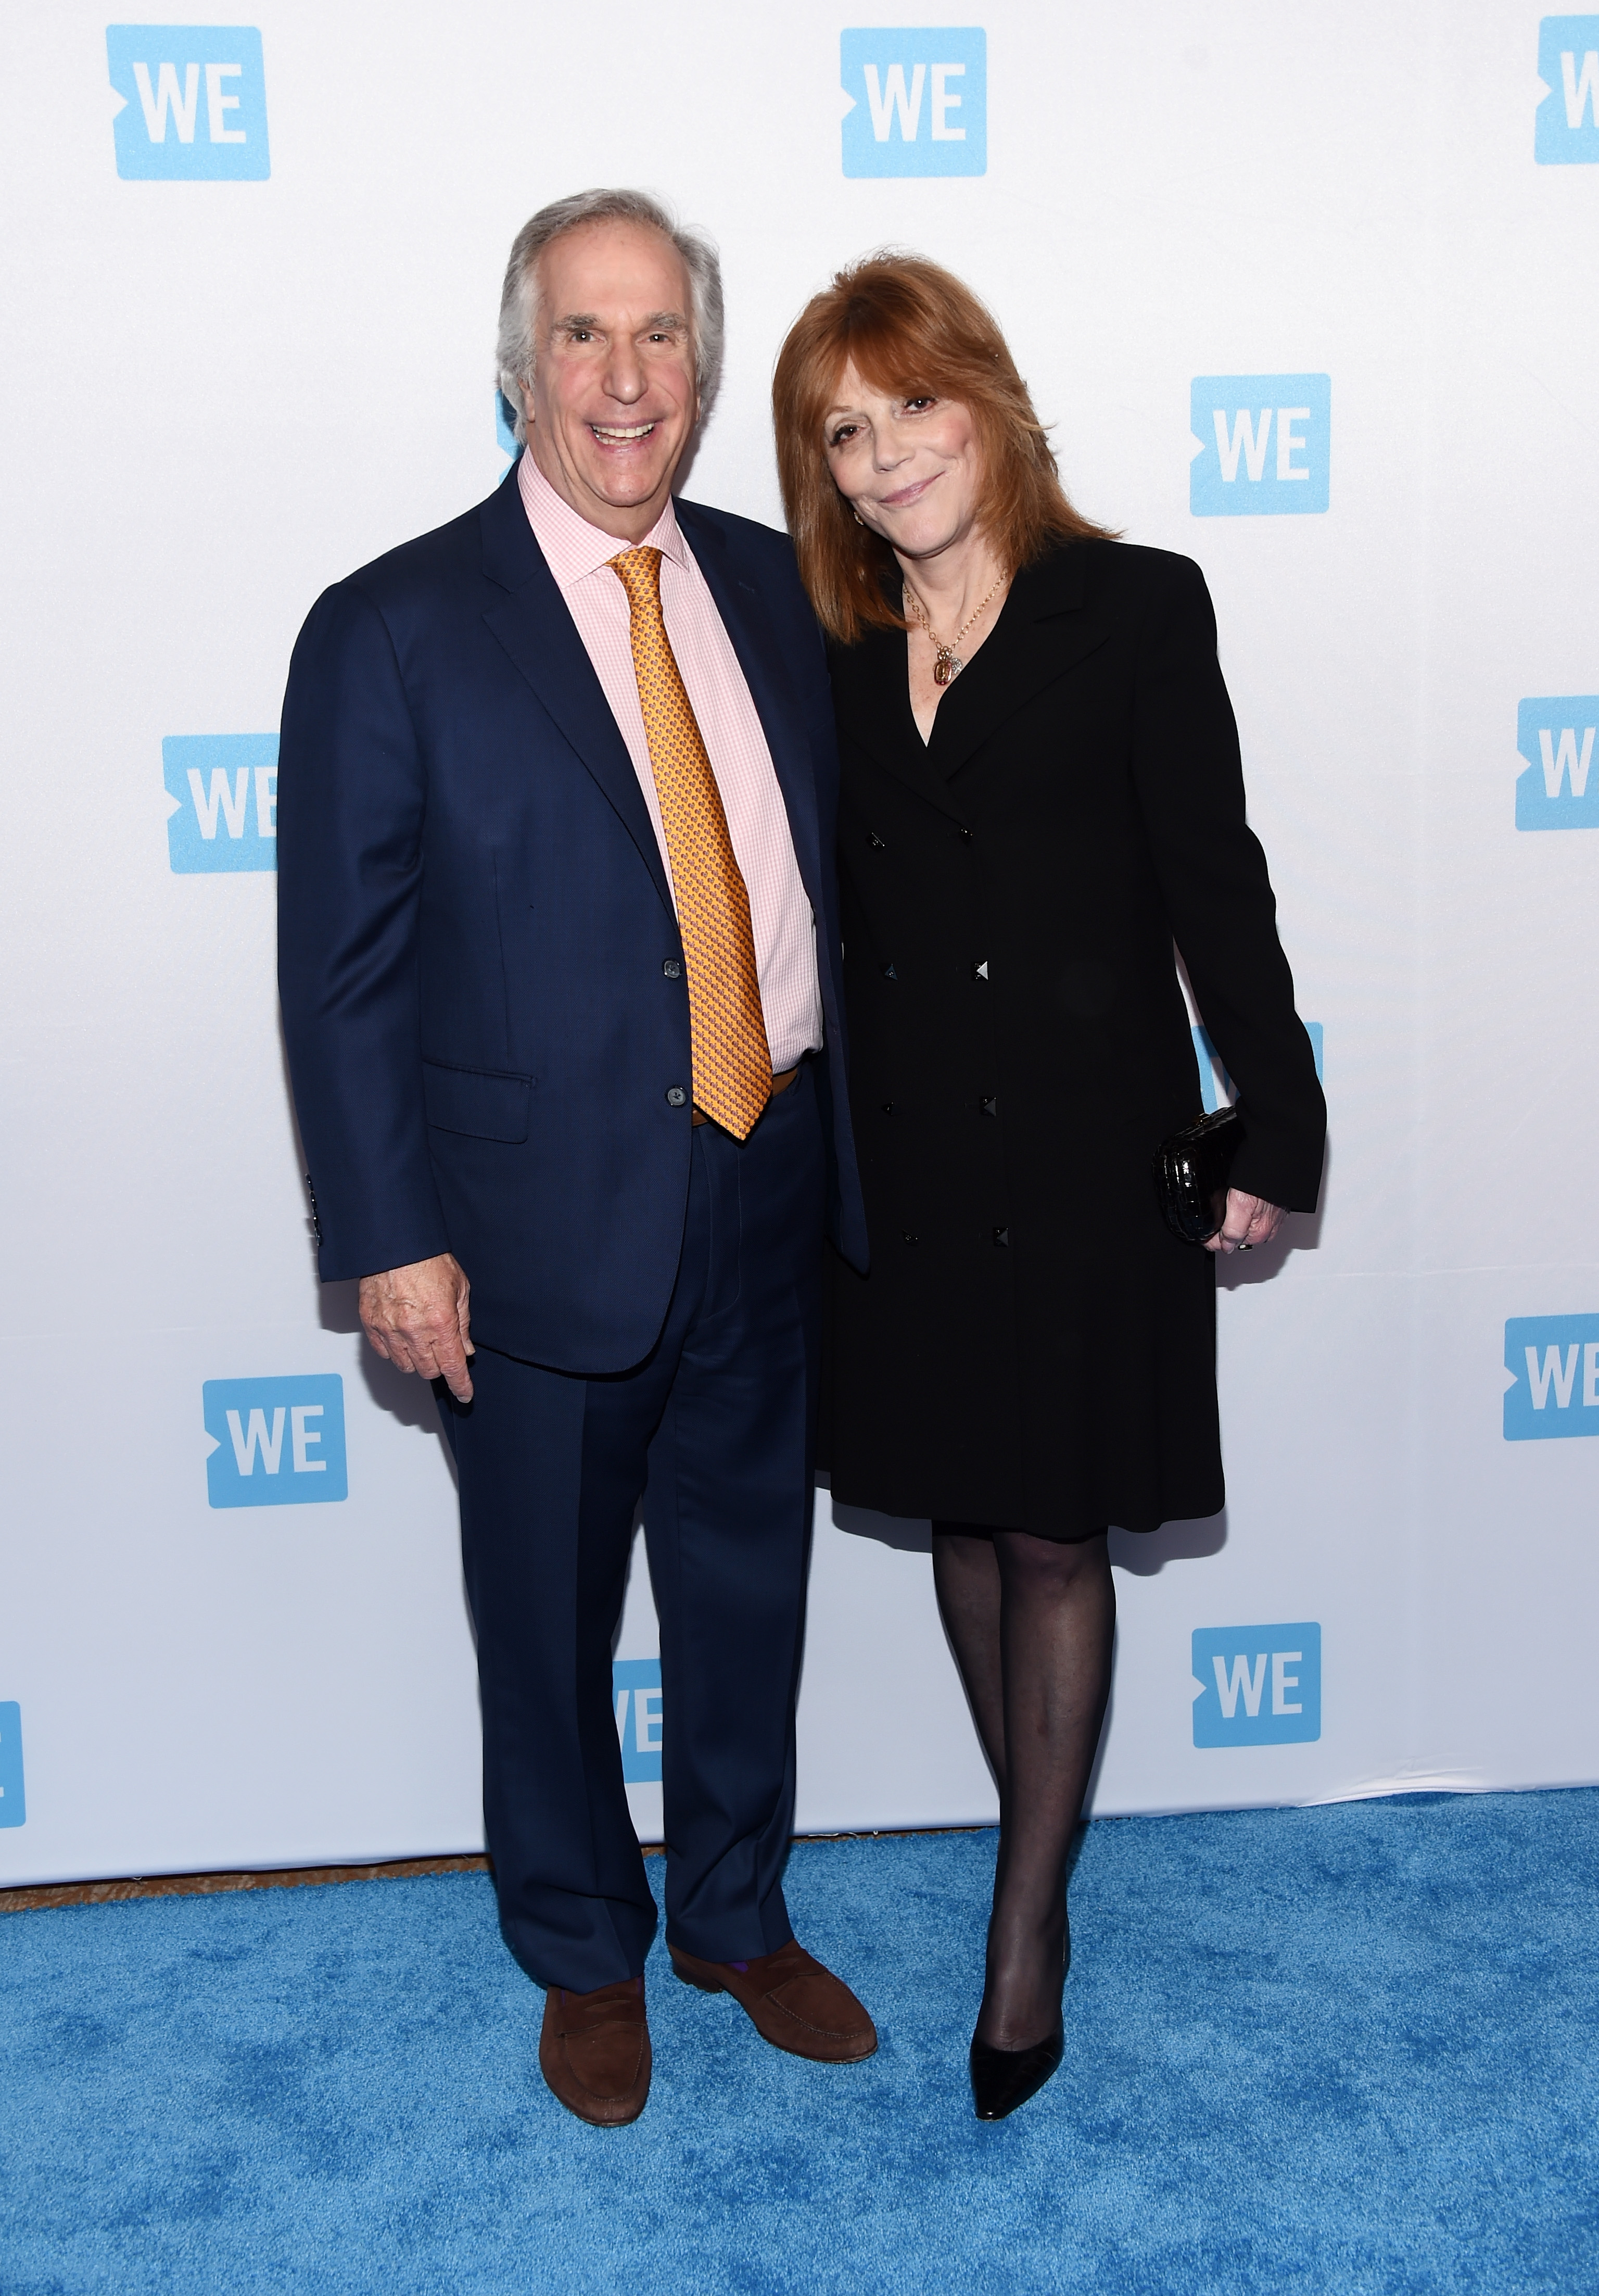 Henry Winkler and Stacey Weitzman at the WE Day celebration dinner in Beverly Hills, California on April 6, 2016 | Source: Getty Images